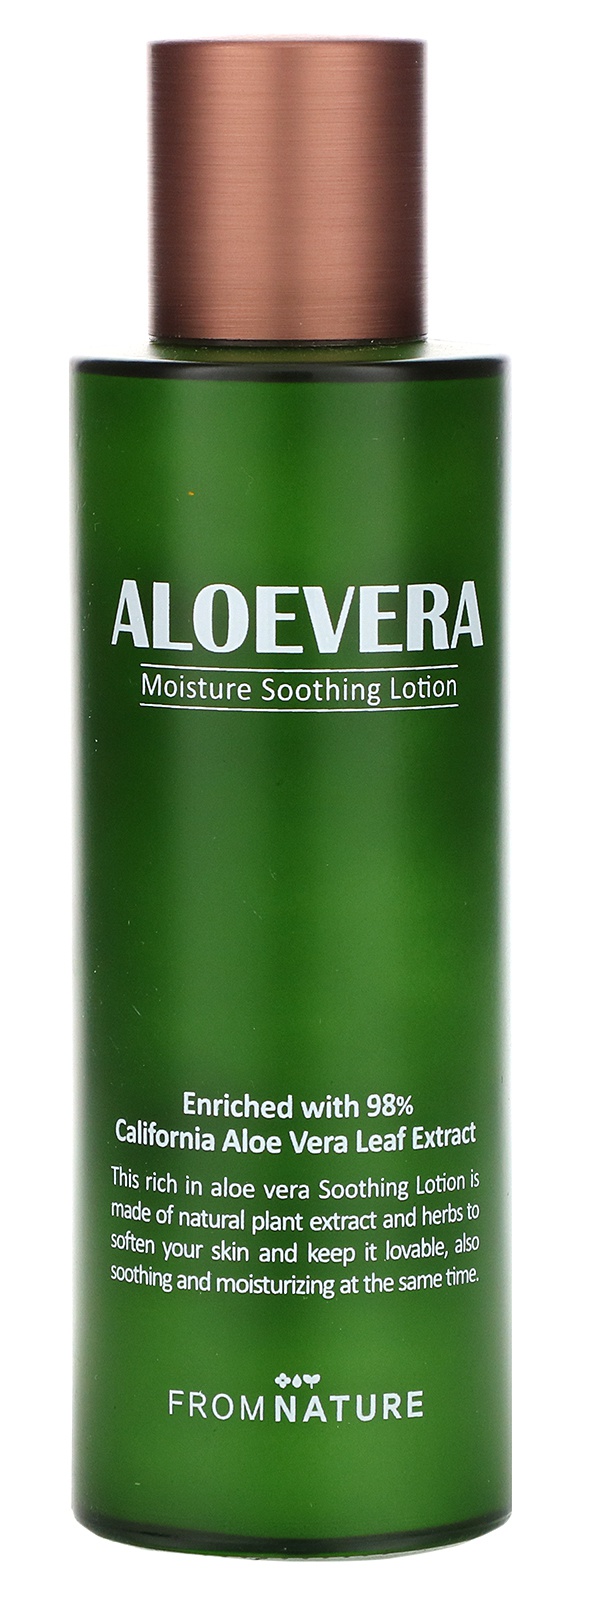 From Nature Moisture Soothing Lotion